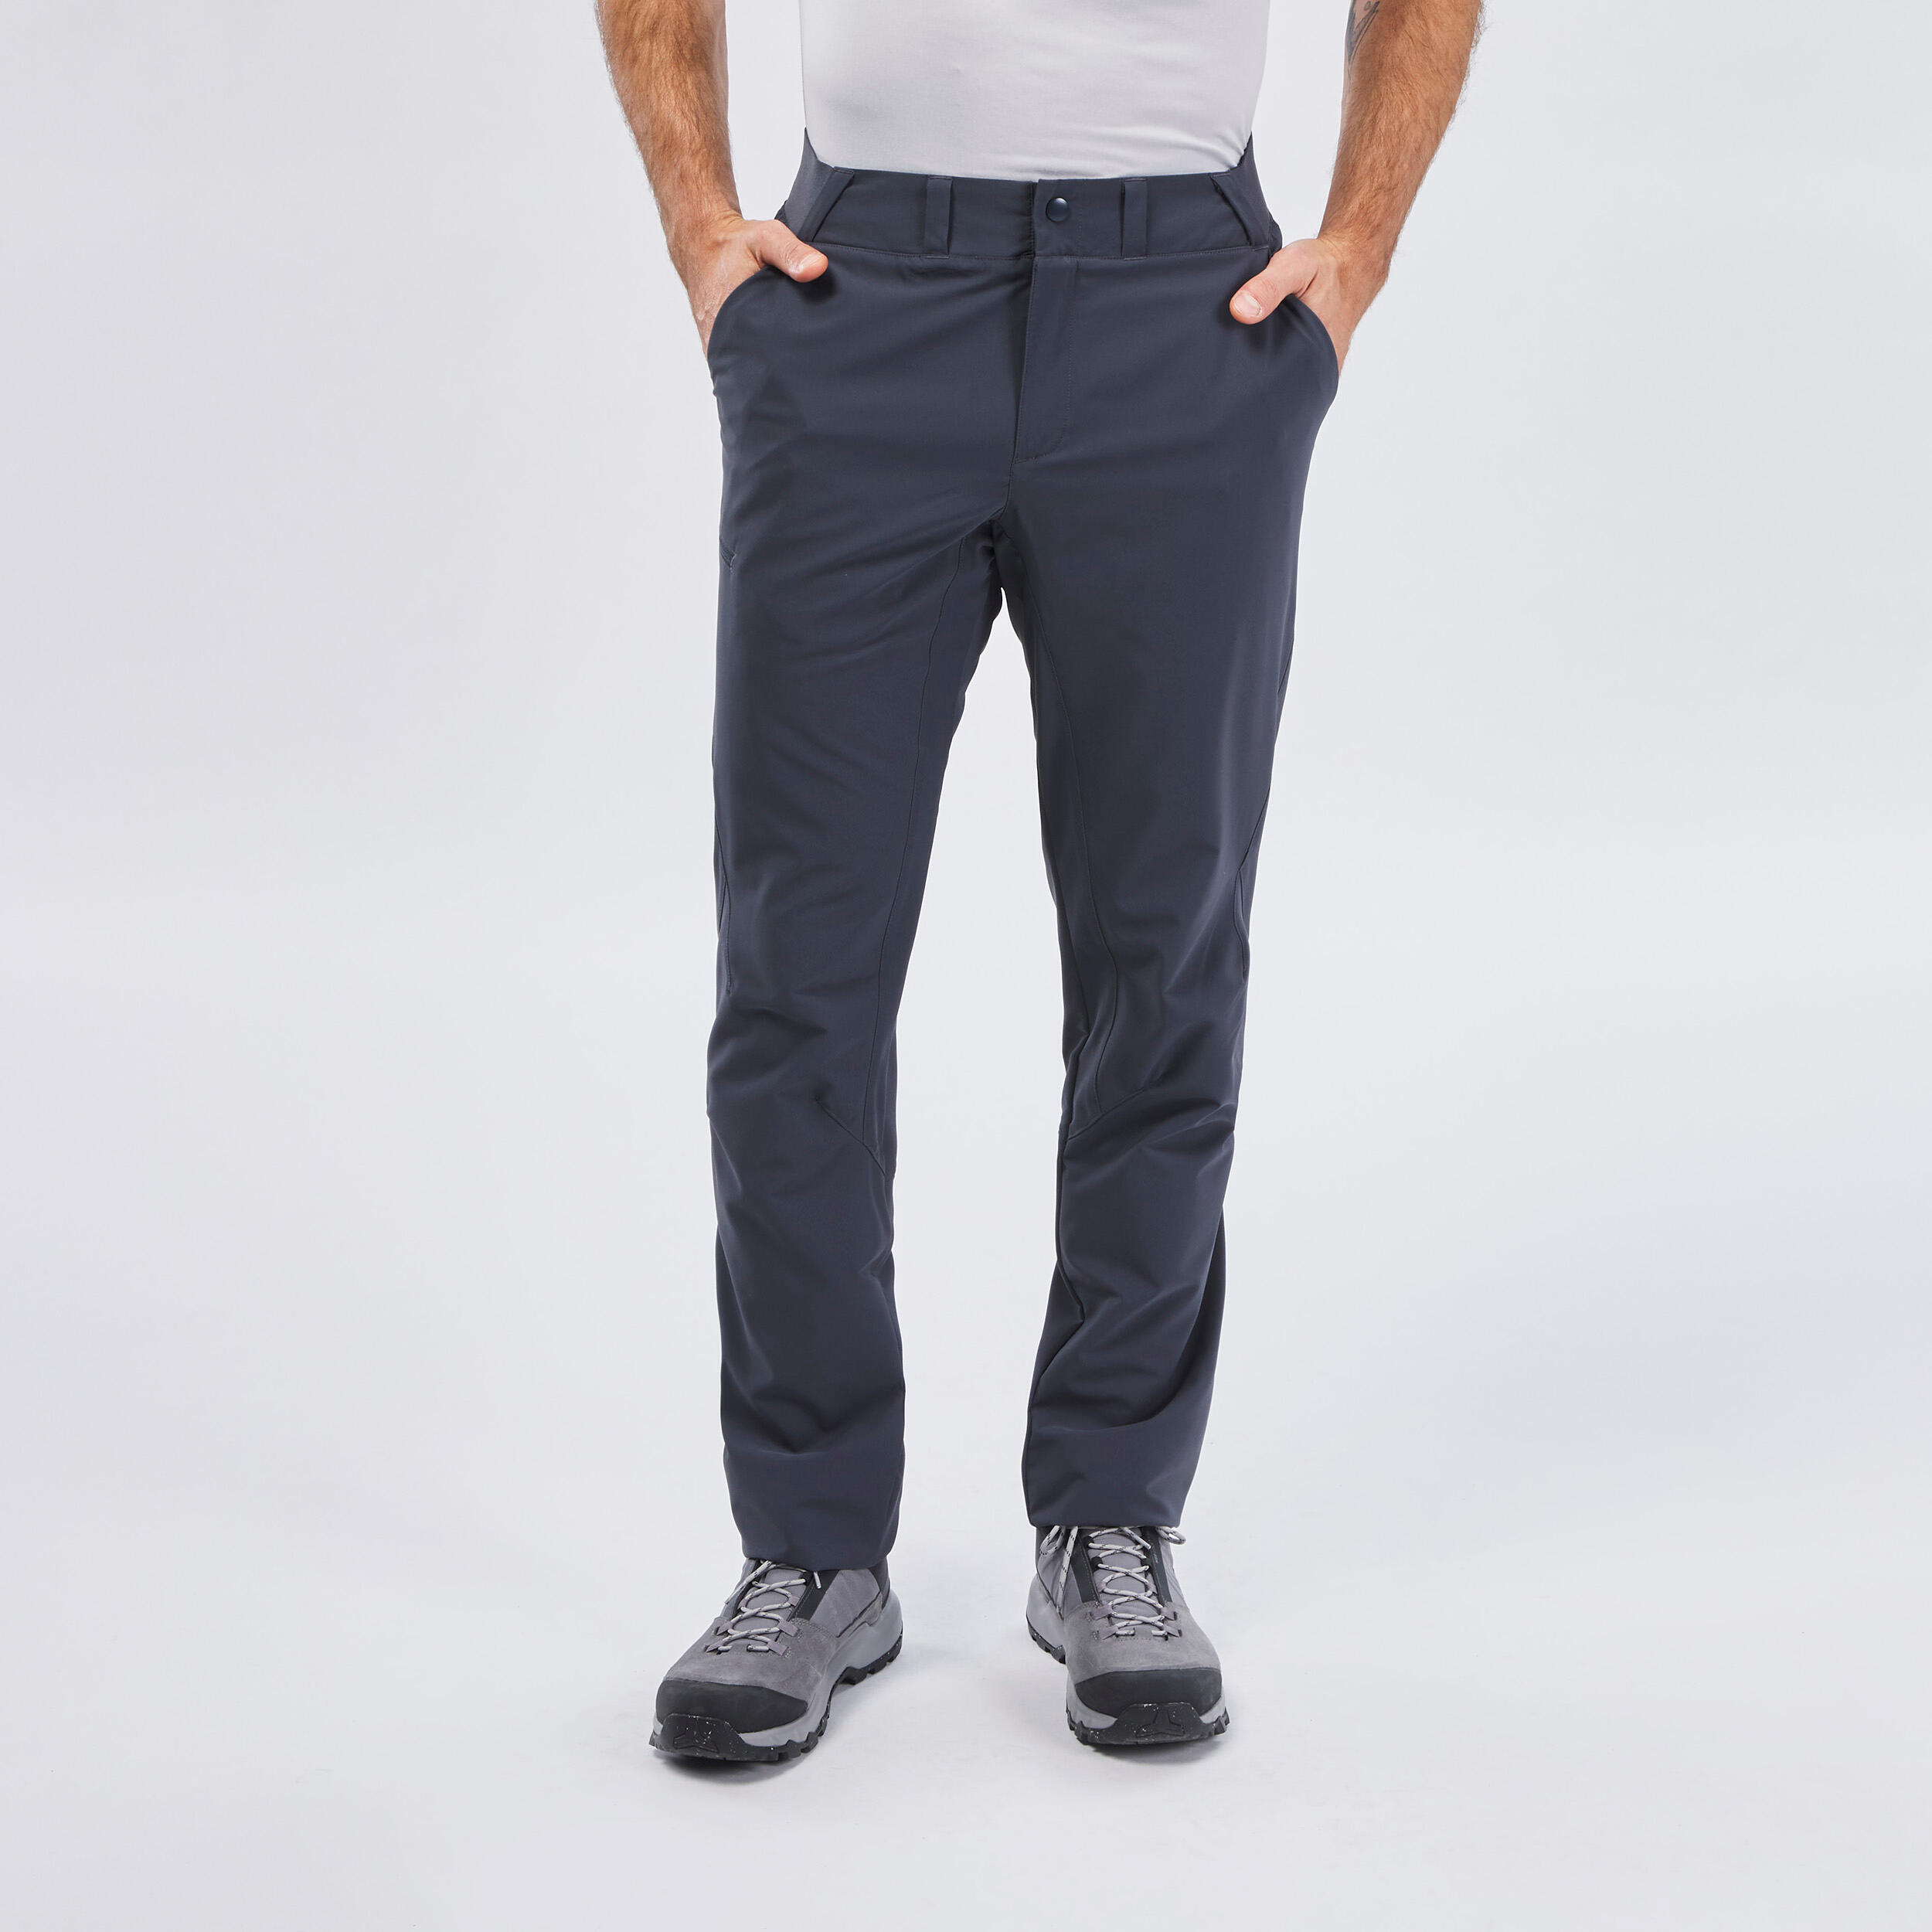 Men's Hiking Trousers - MH100 3/6